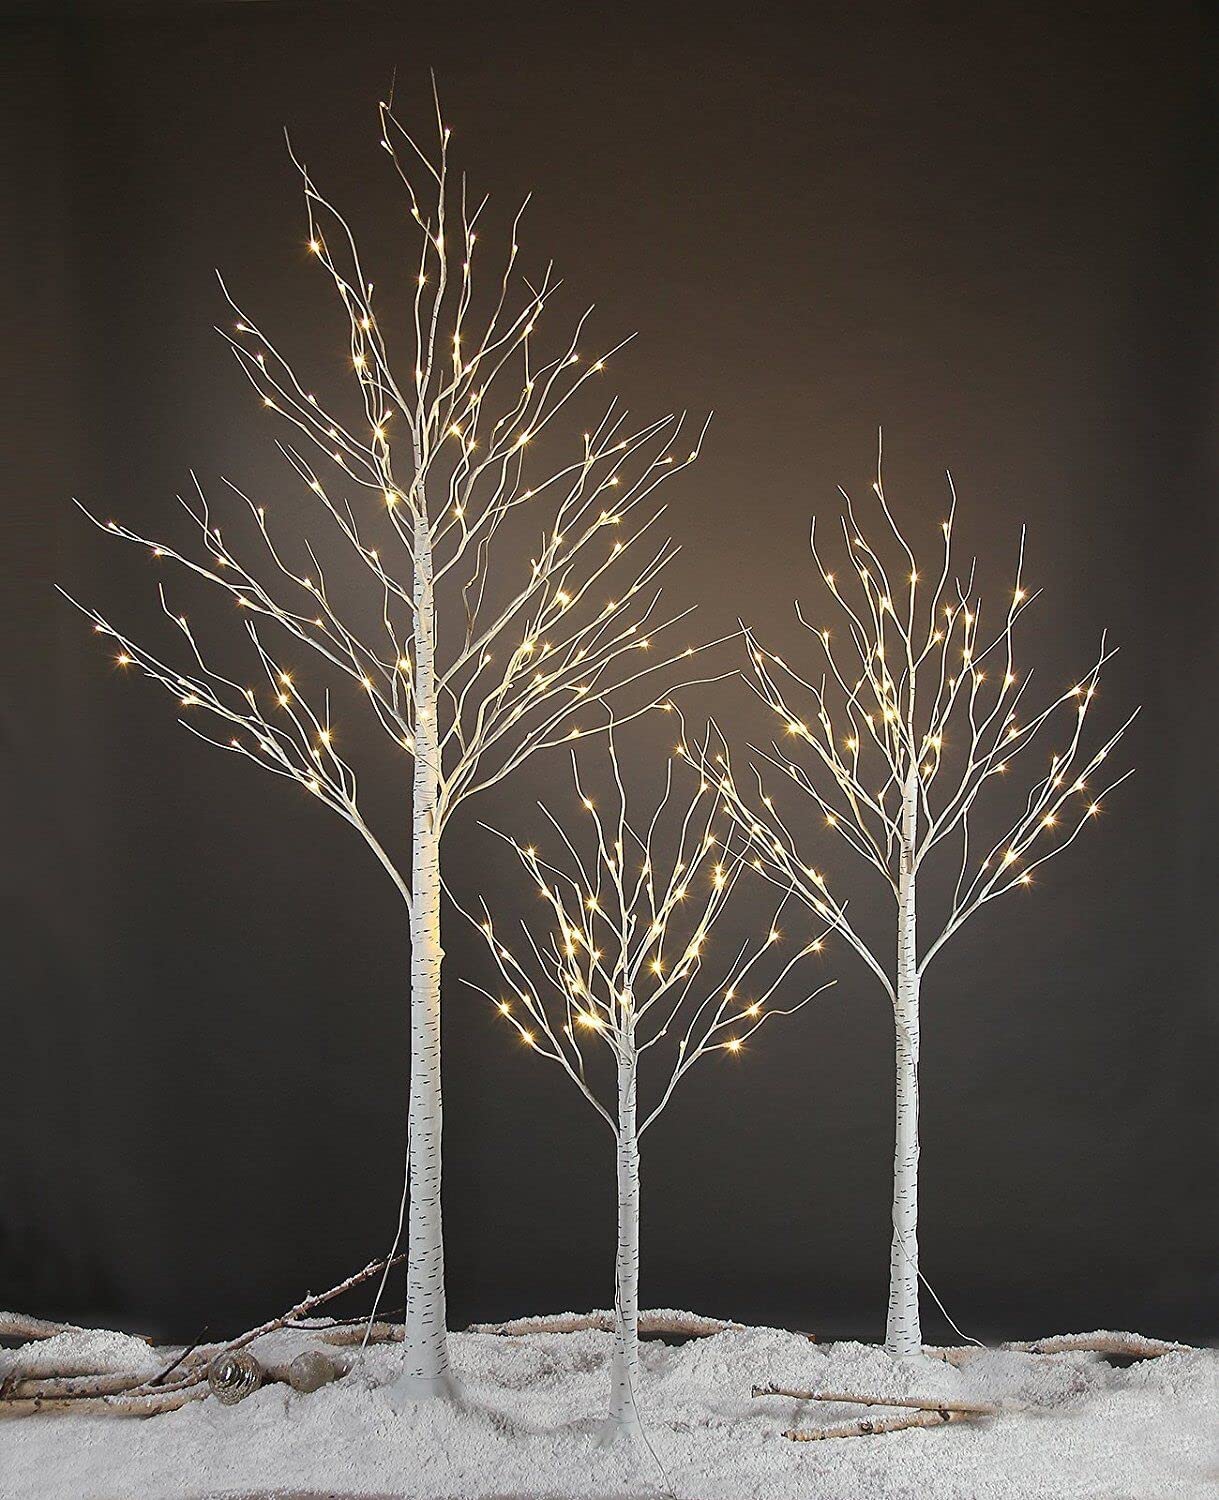 Set of 3 Lighted Birch Tree 4FT 6FT and 8FT for Decoration Inside and Outside , Home Patio Wedding Festival Christmas Decor , Warm White